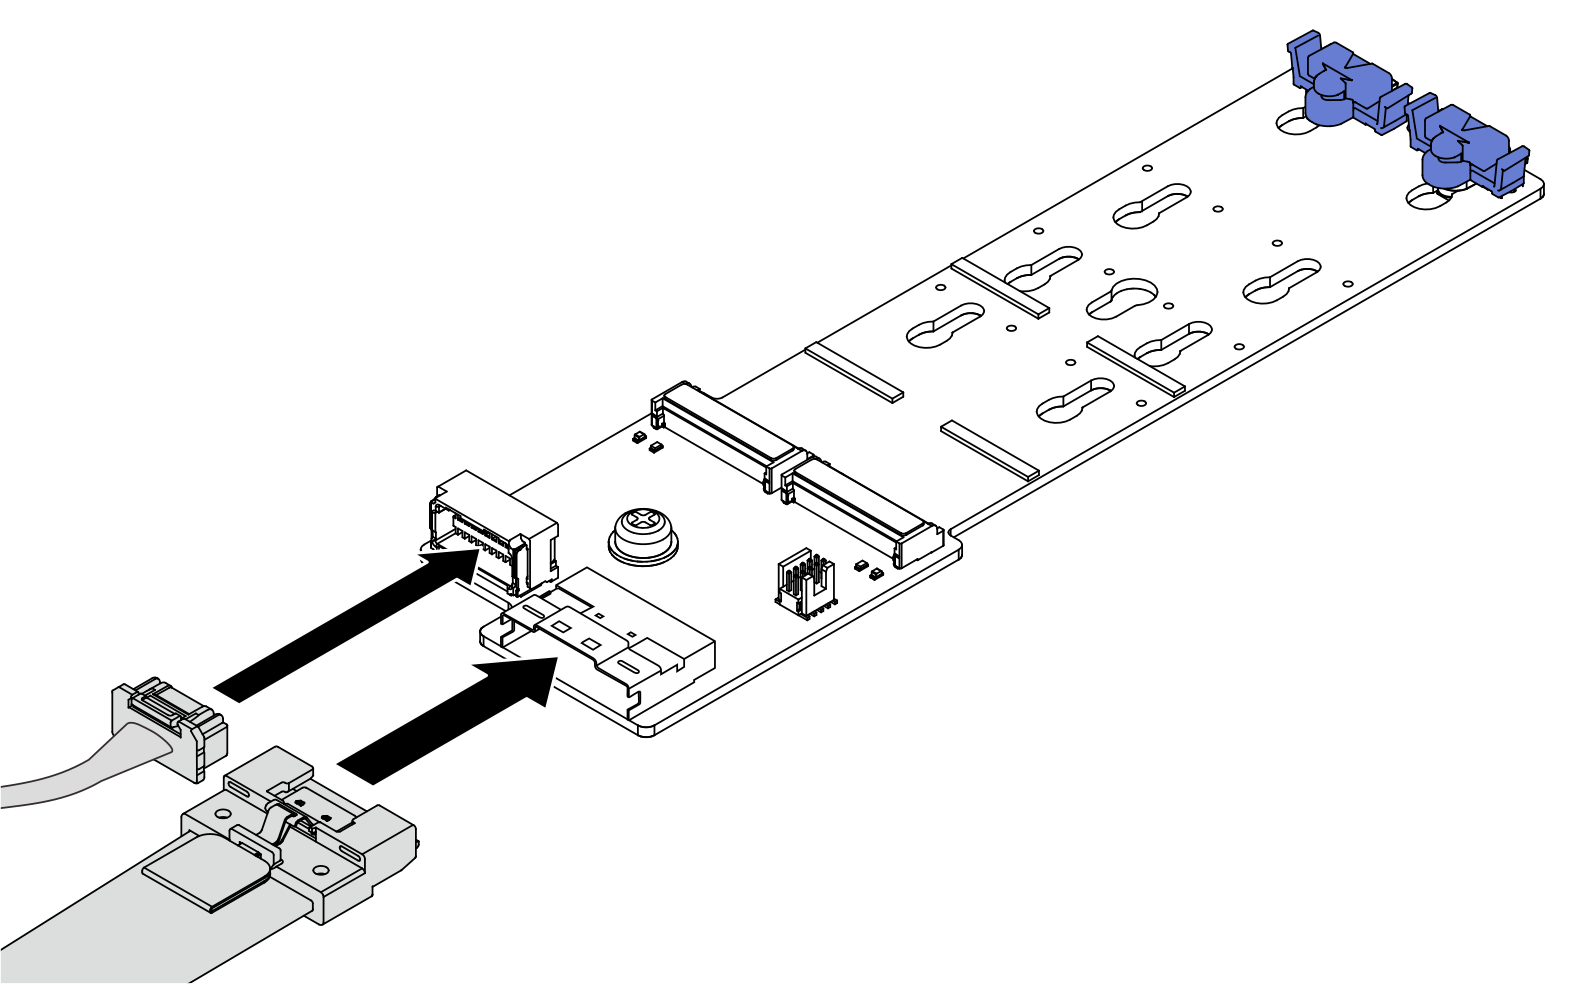 Connecting M.2 cables to M.2 backplane